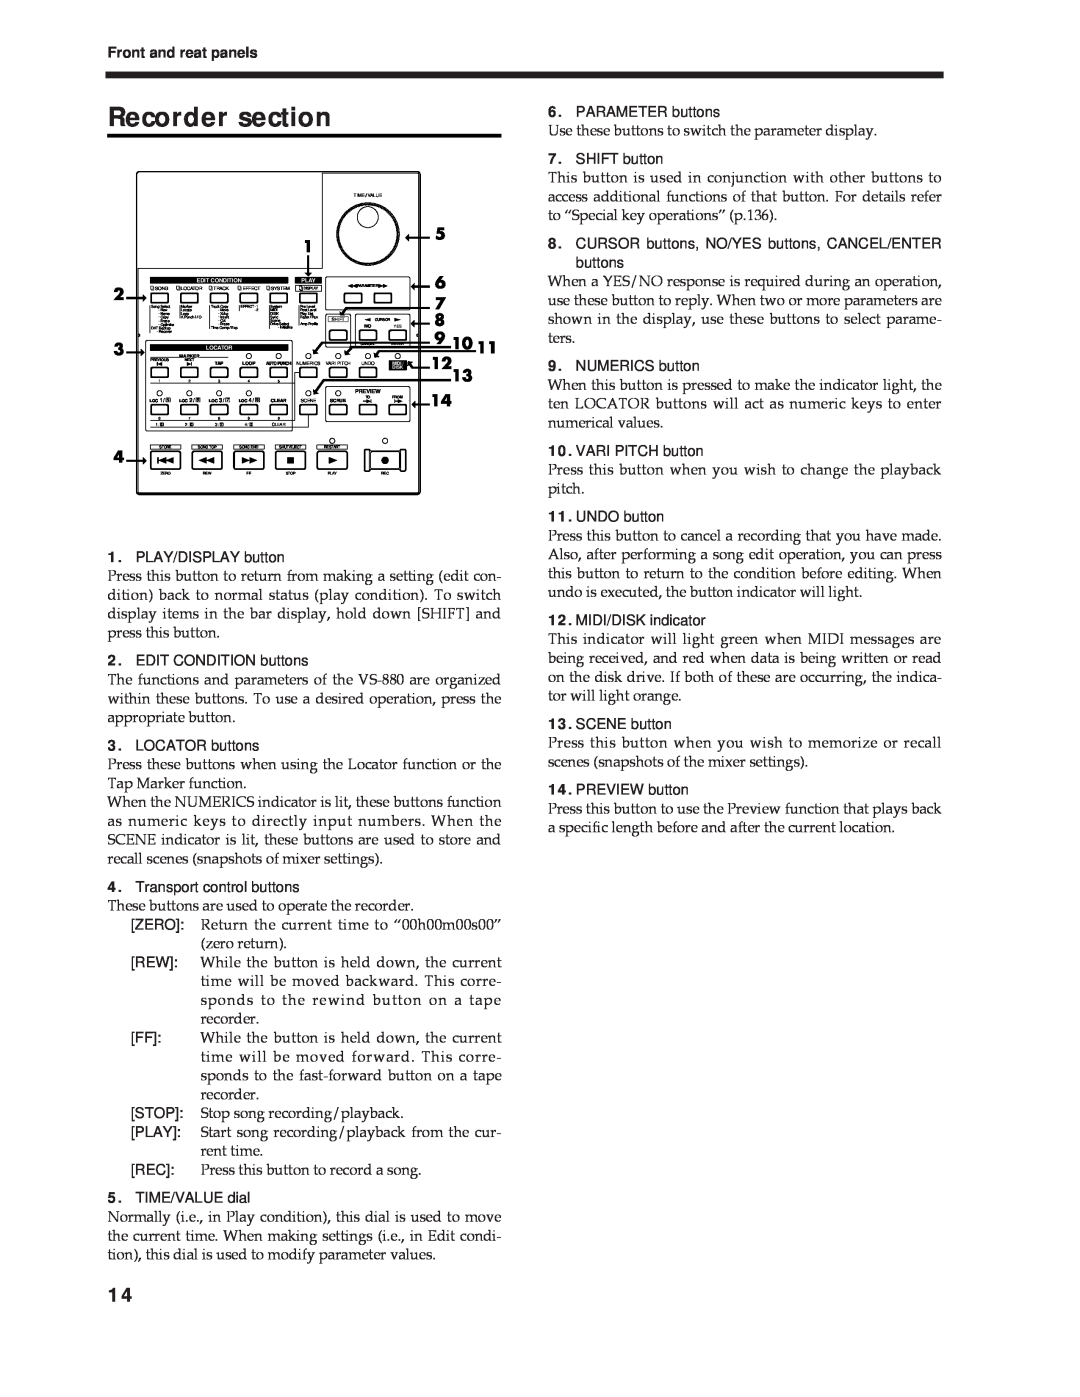 Roland Vs-880 important safety instructions Recorder section, Front and reat panels 